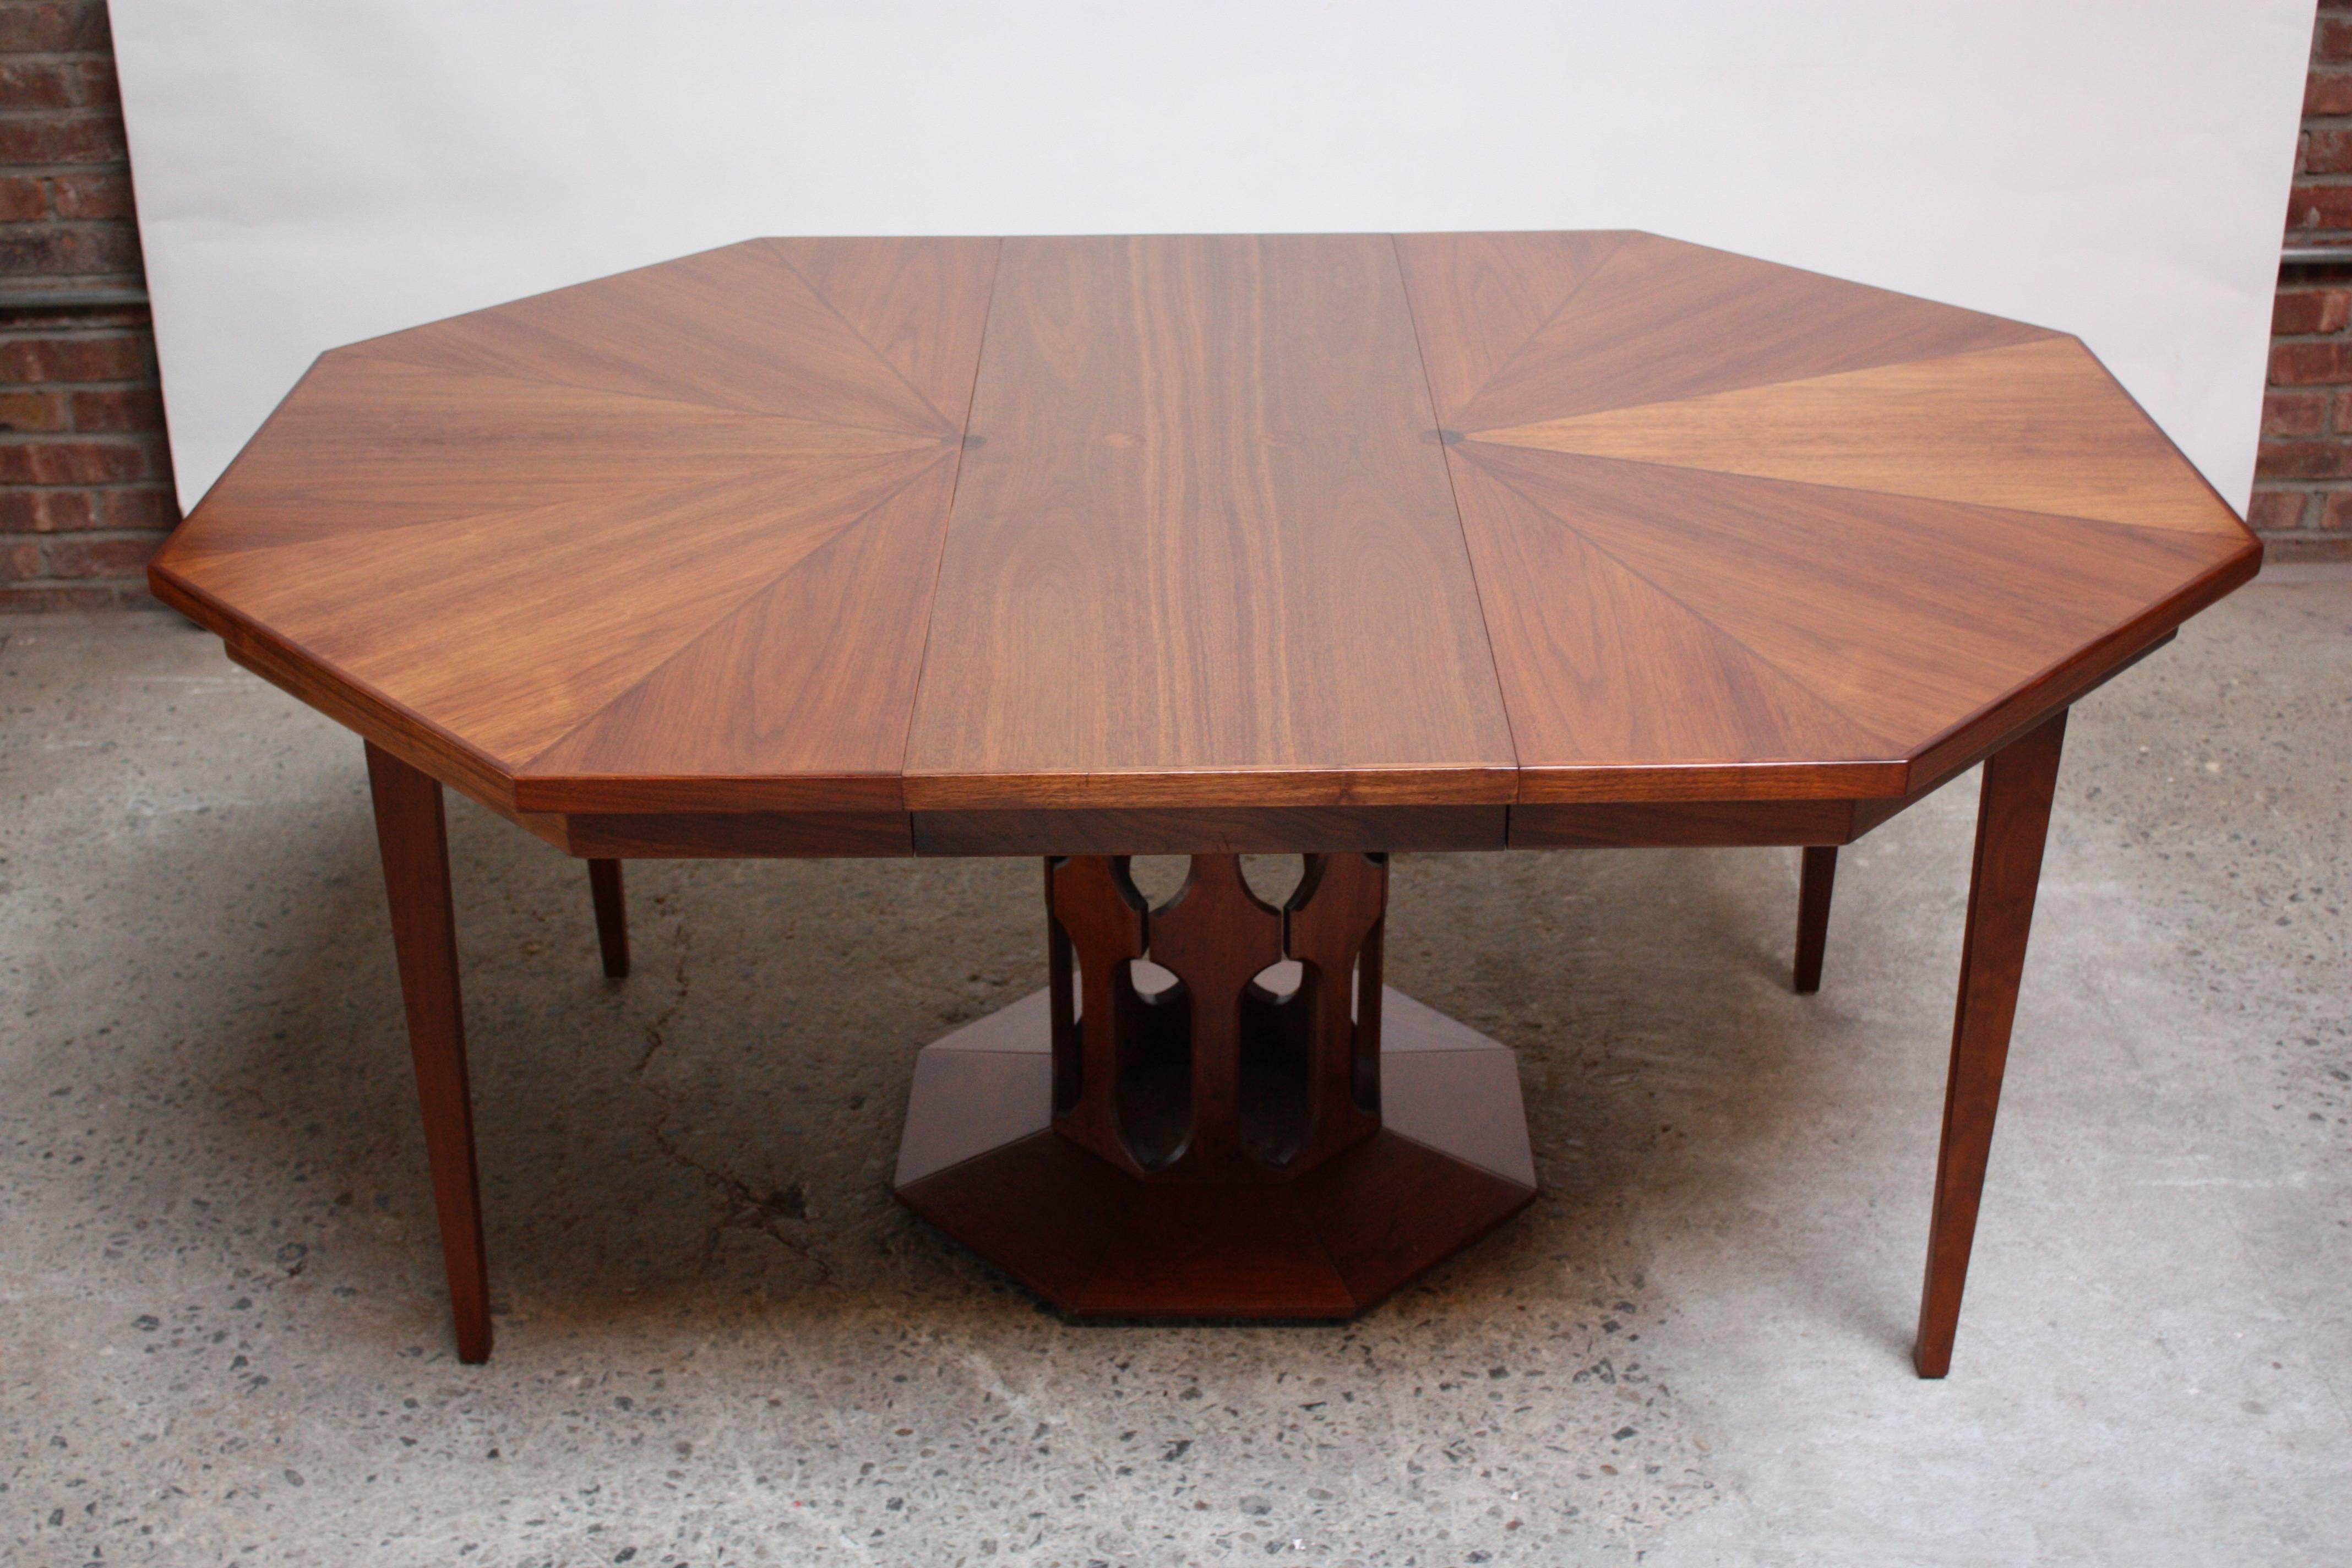 American Octagonal Walnut Dining Table Attributed to Harvey Probber